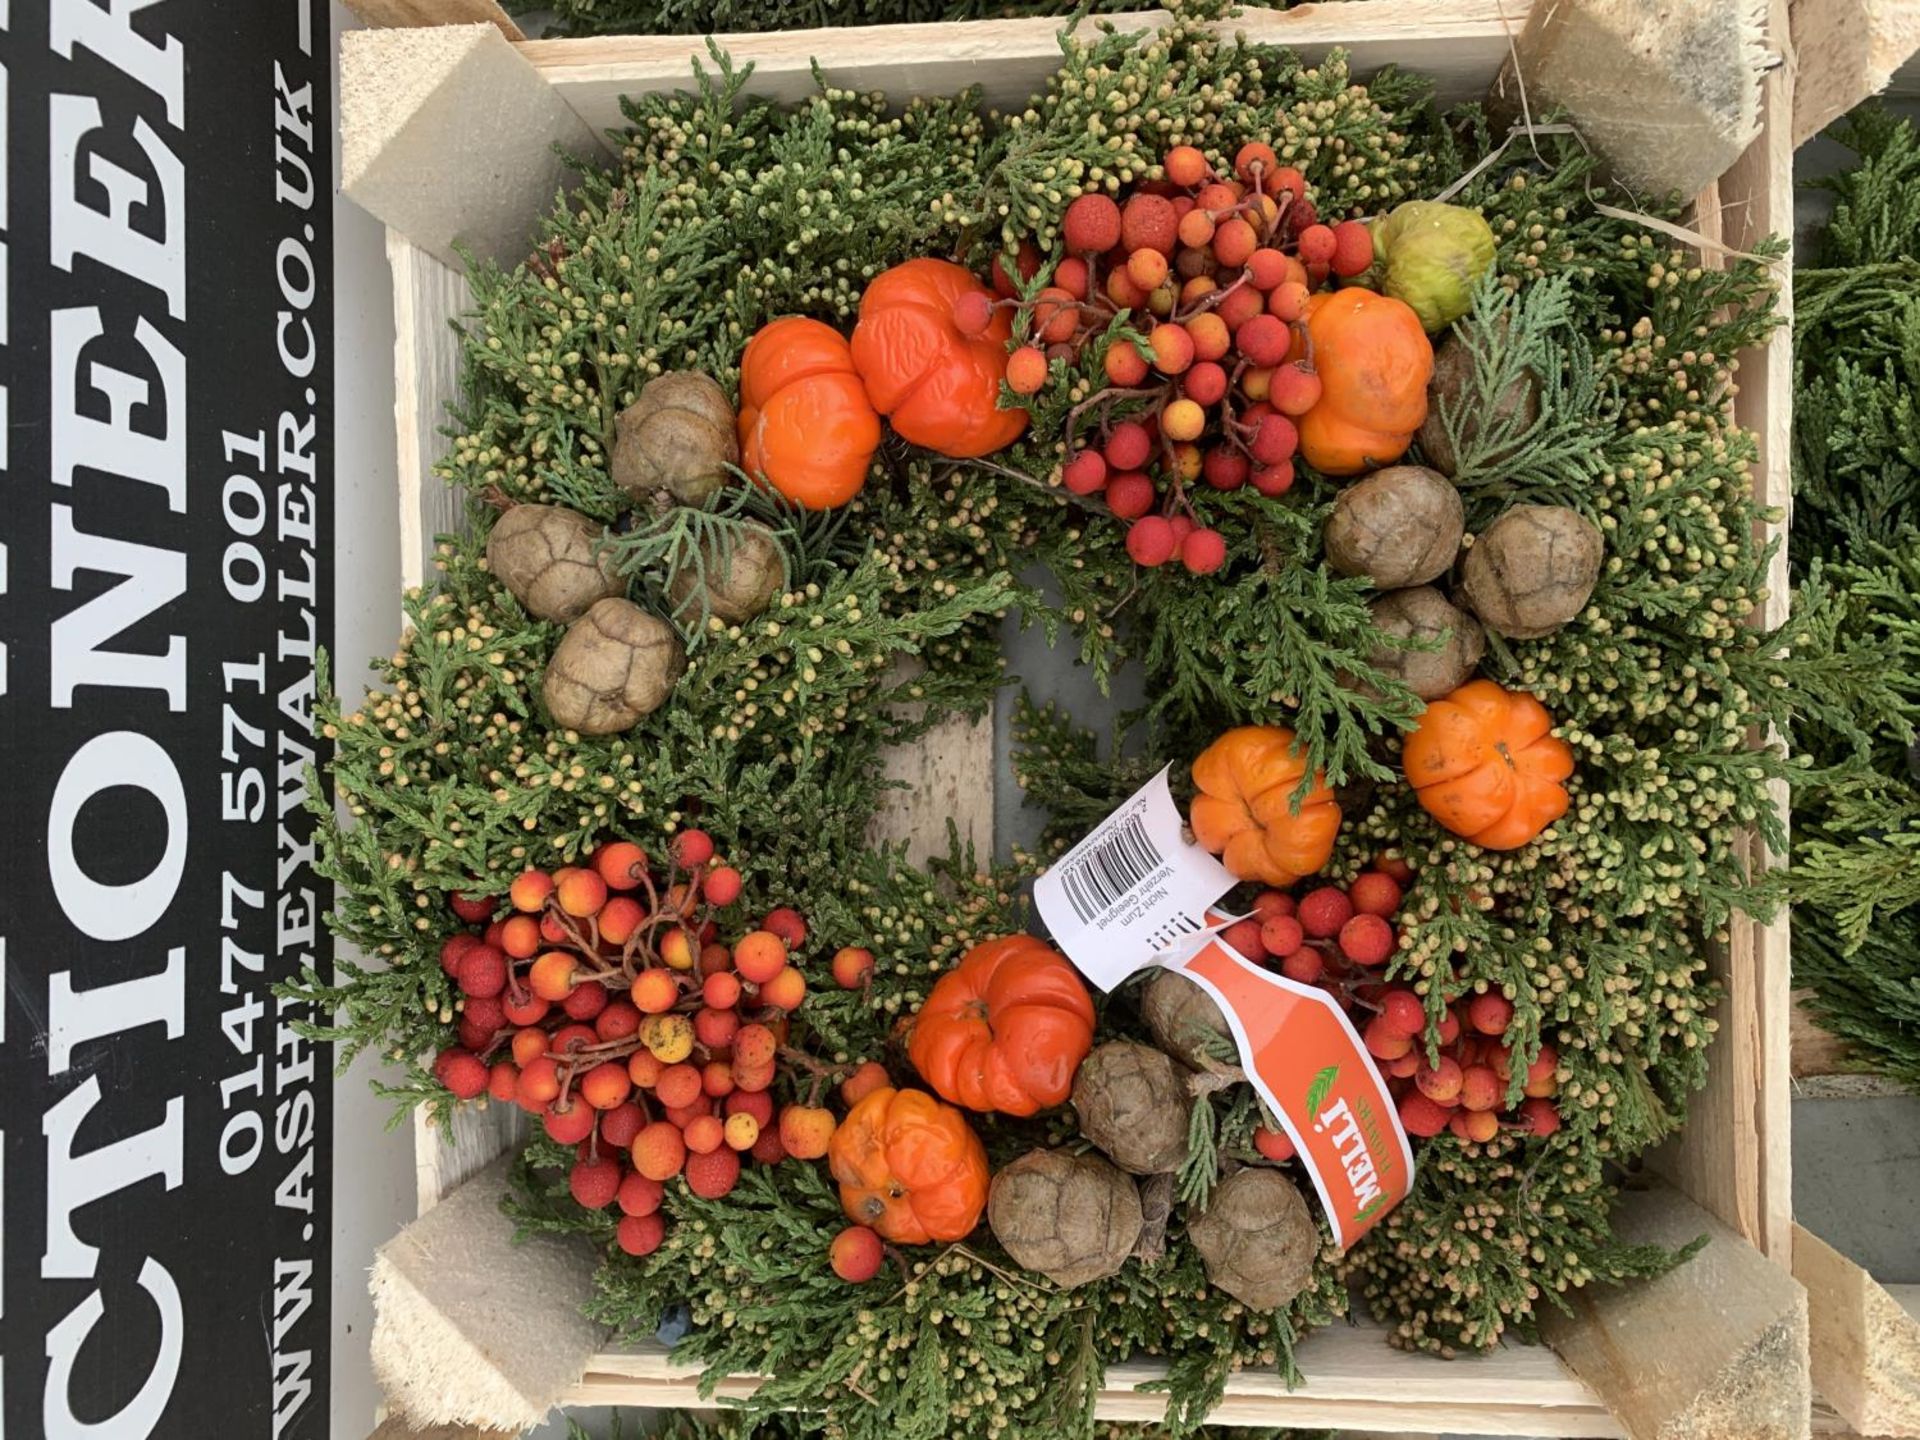 SIX WINTER WREATHS WITH VARIOUS FRUITS AND BERRIES IN A PRESENTATION CRATE + VAT TO BE SOLD FOR - Image 5 of 9